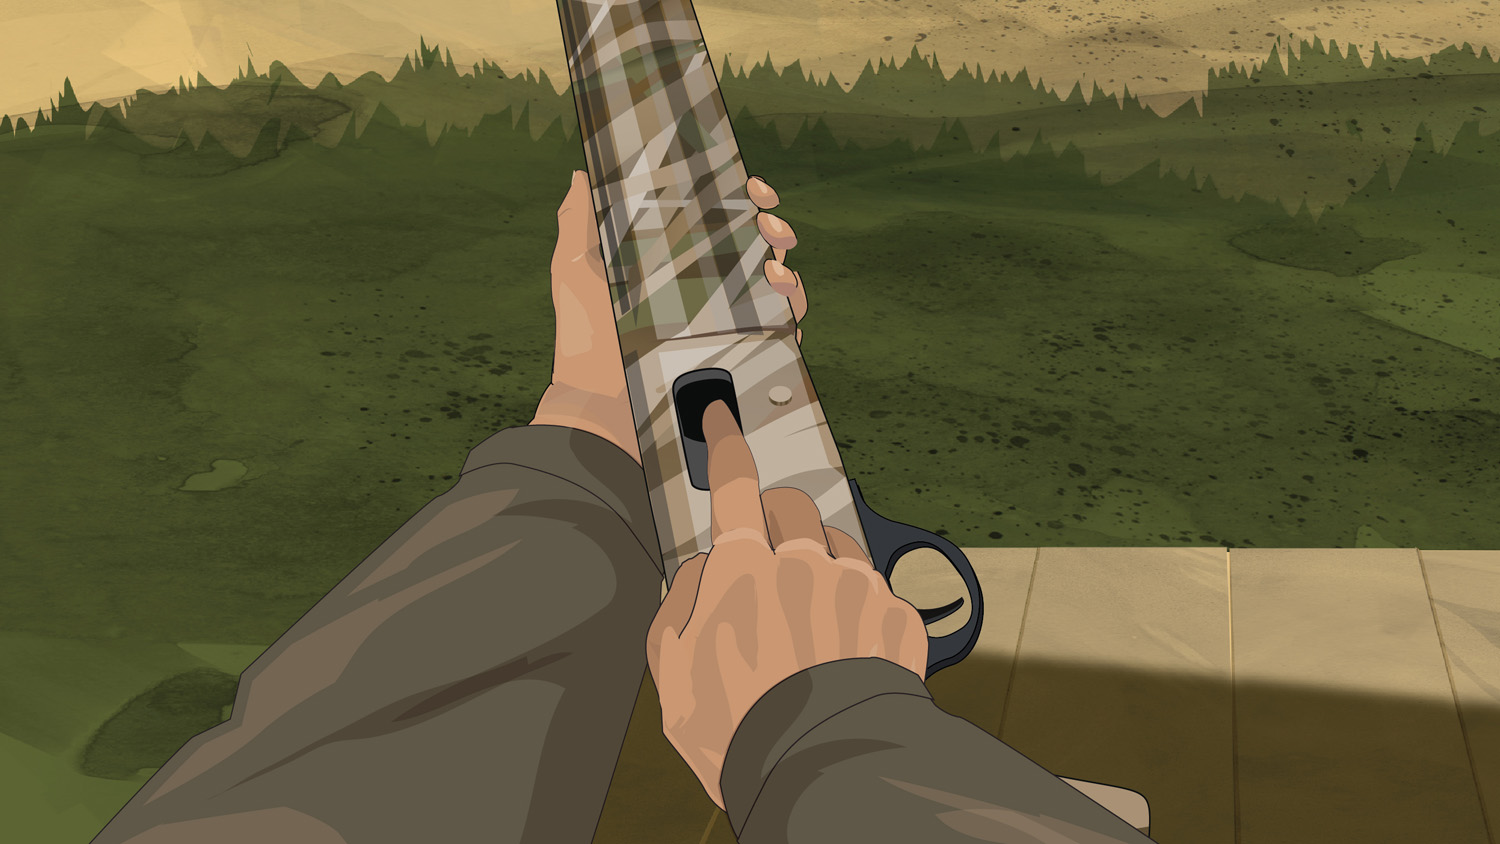 Illustration of a hunter's finger checking a semi-automatic action shotgun's feeding path for ammunition or obstructions.